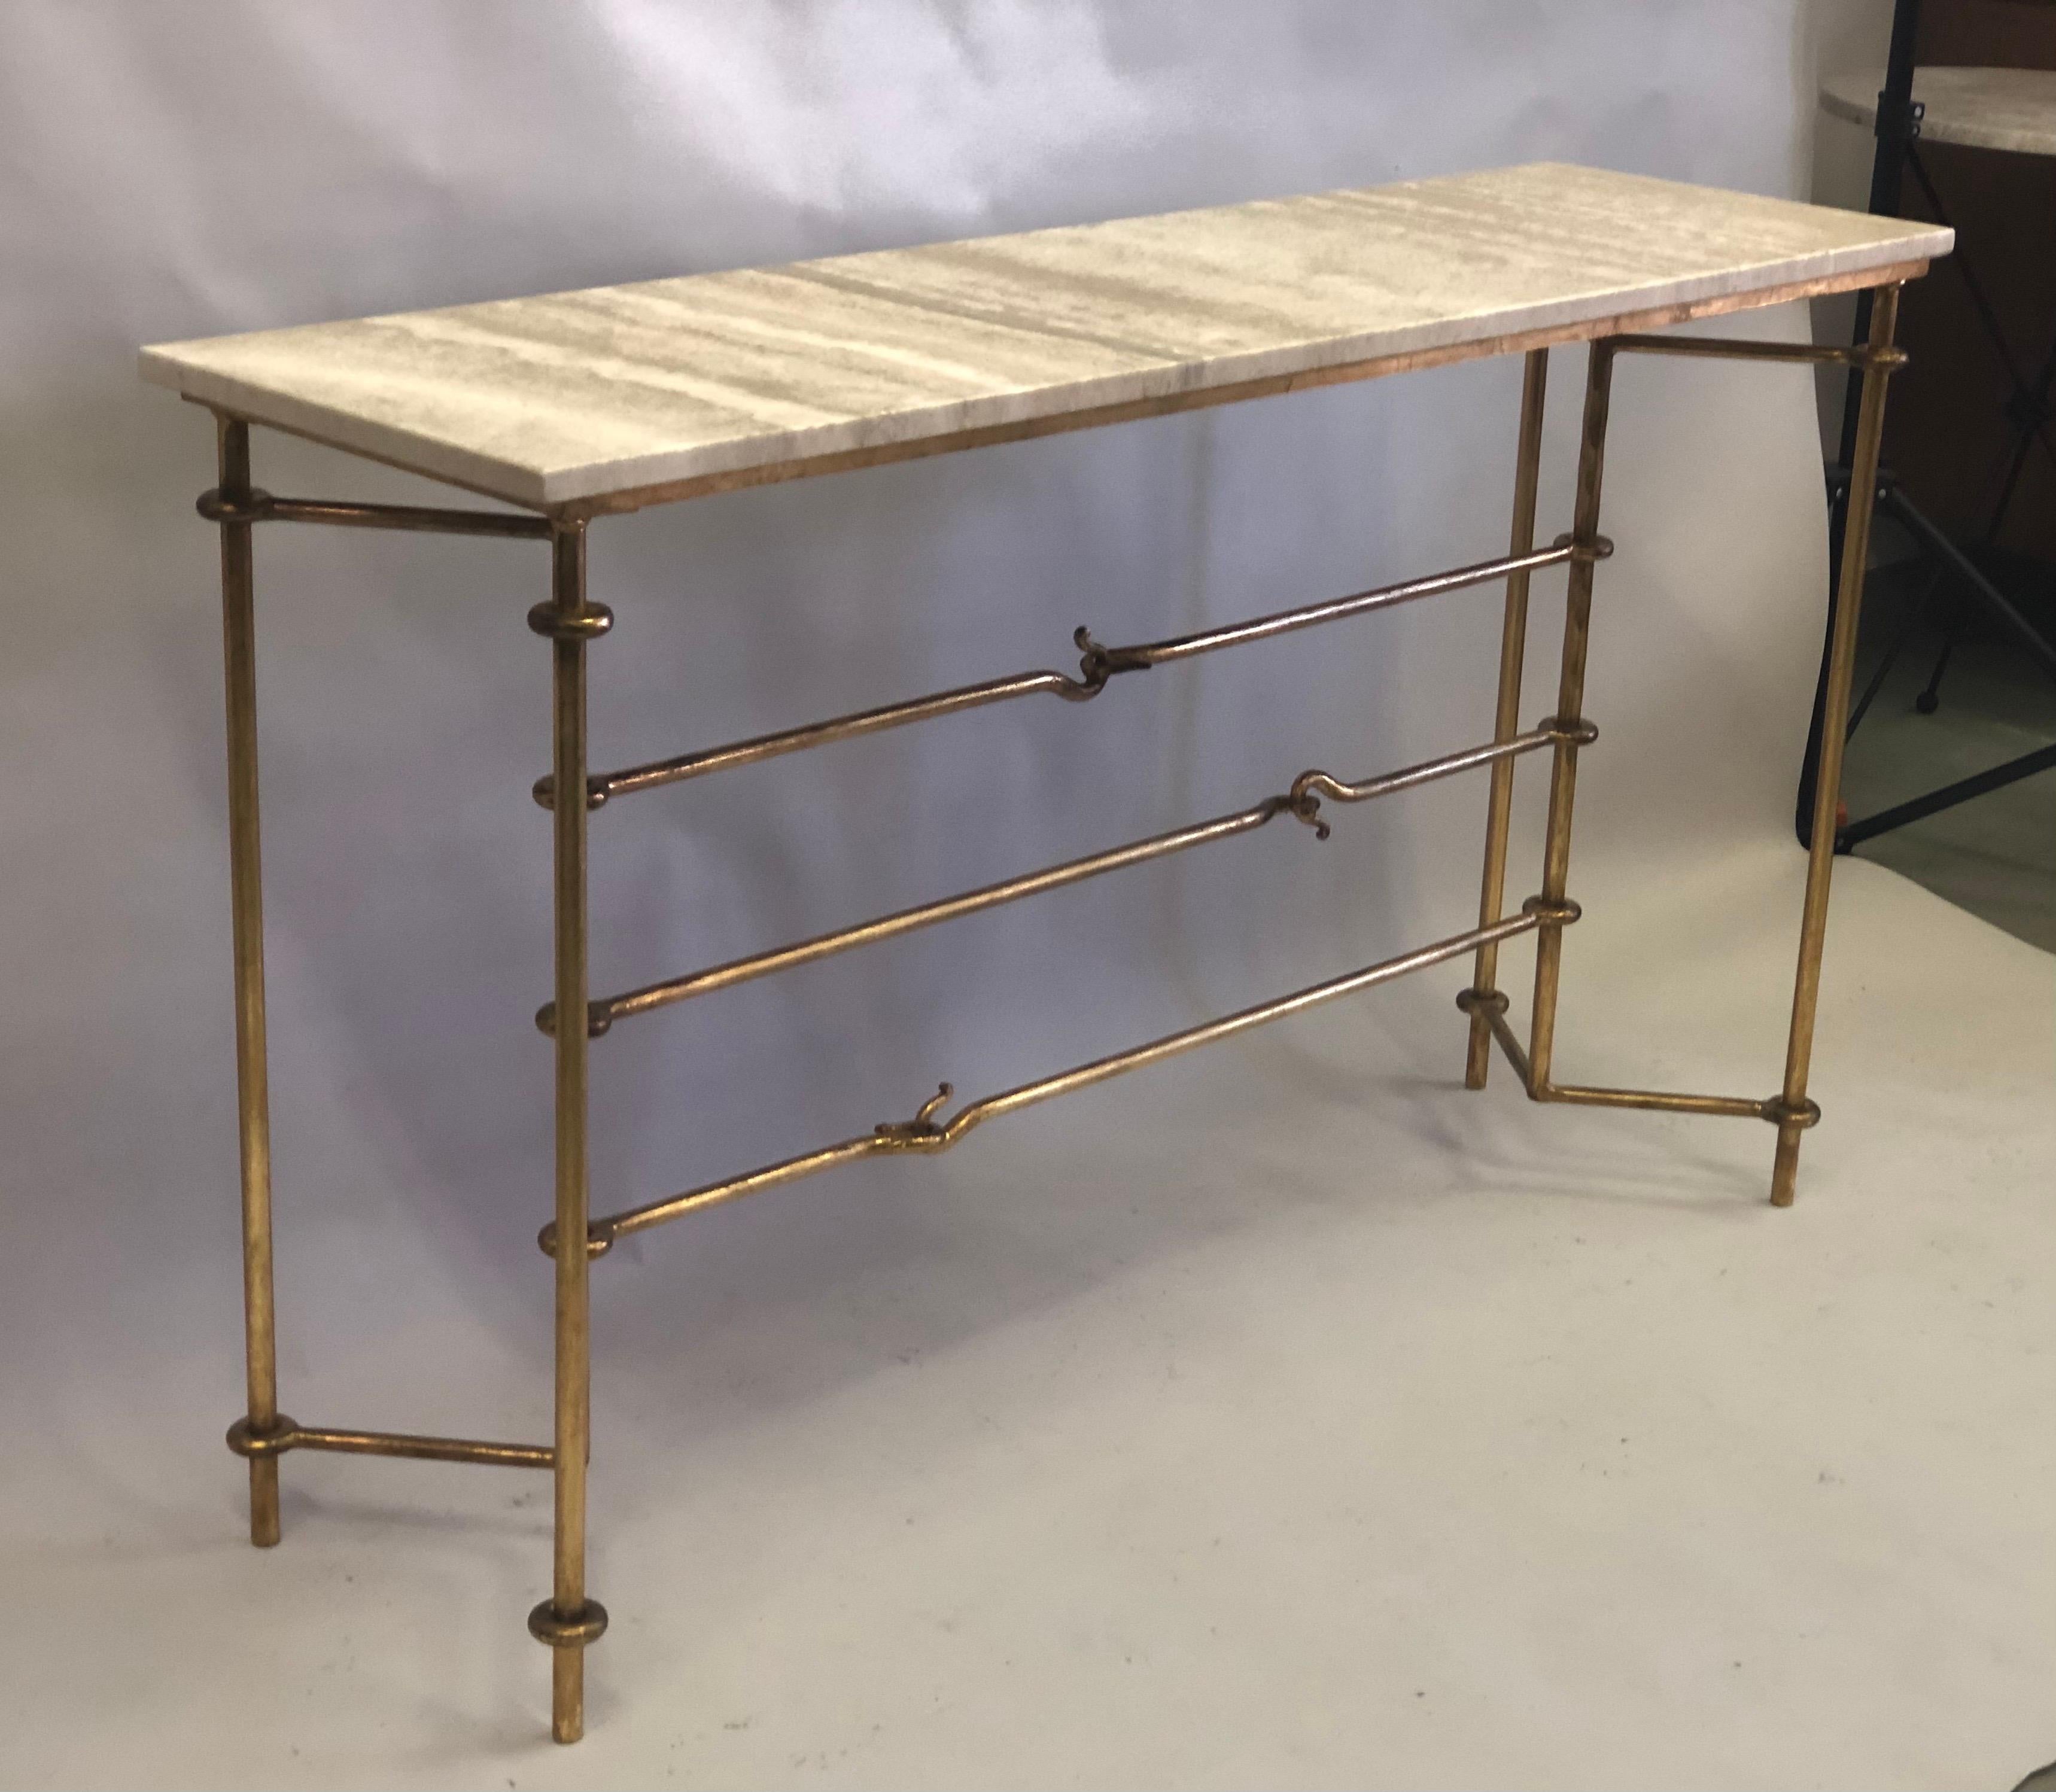 20th Century Italian Mid-Century Modern Neoclassical Gilt Iron Console by Banci for Hermès For Sale